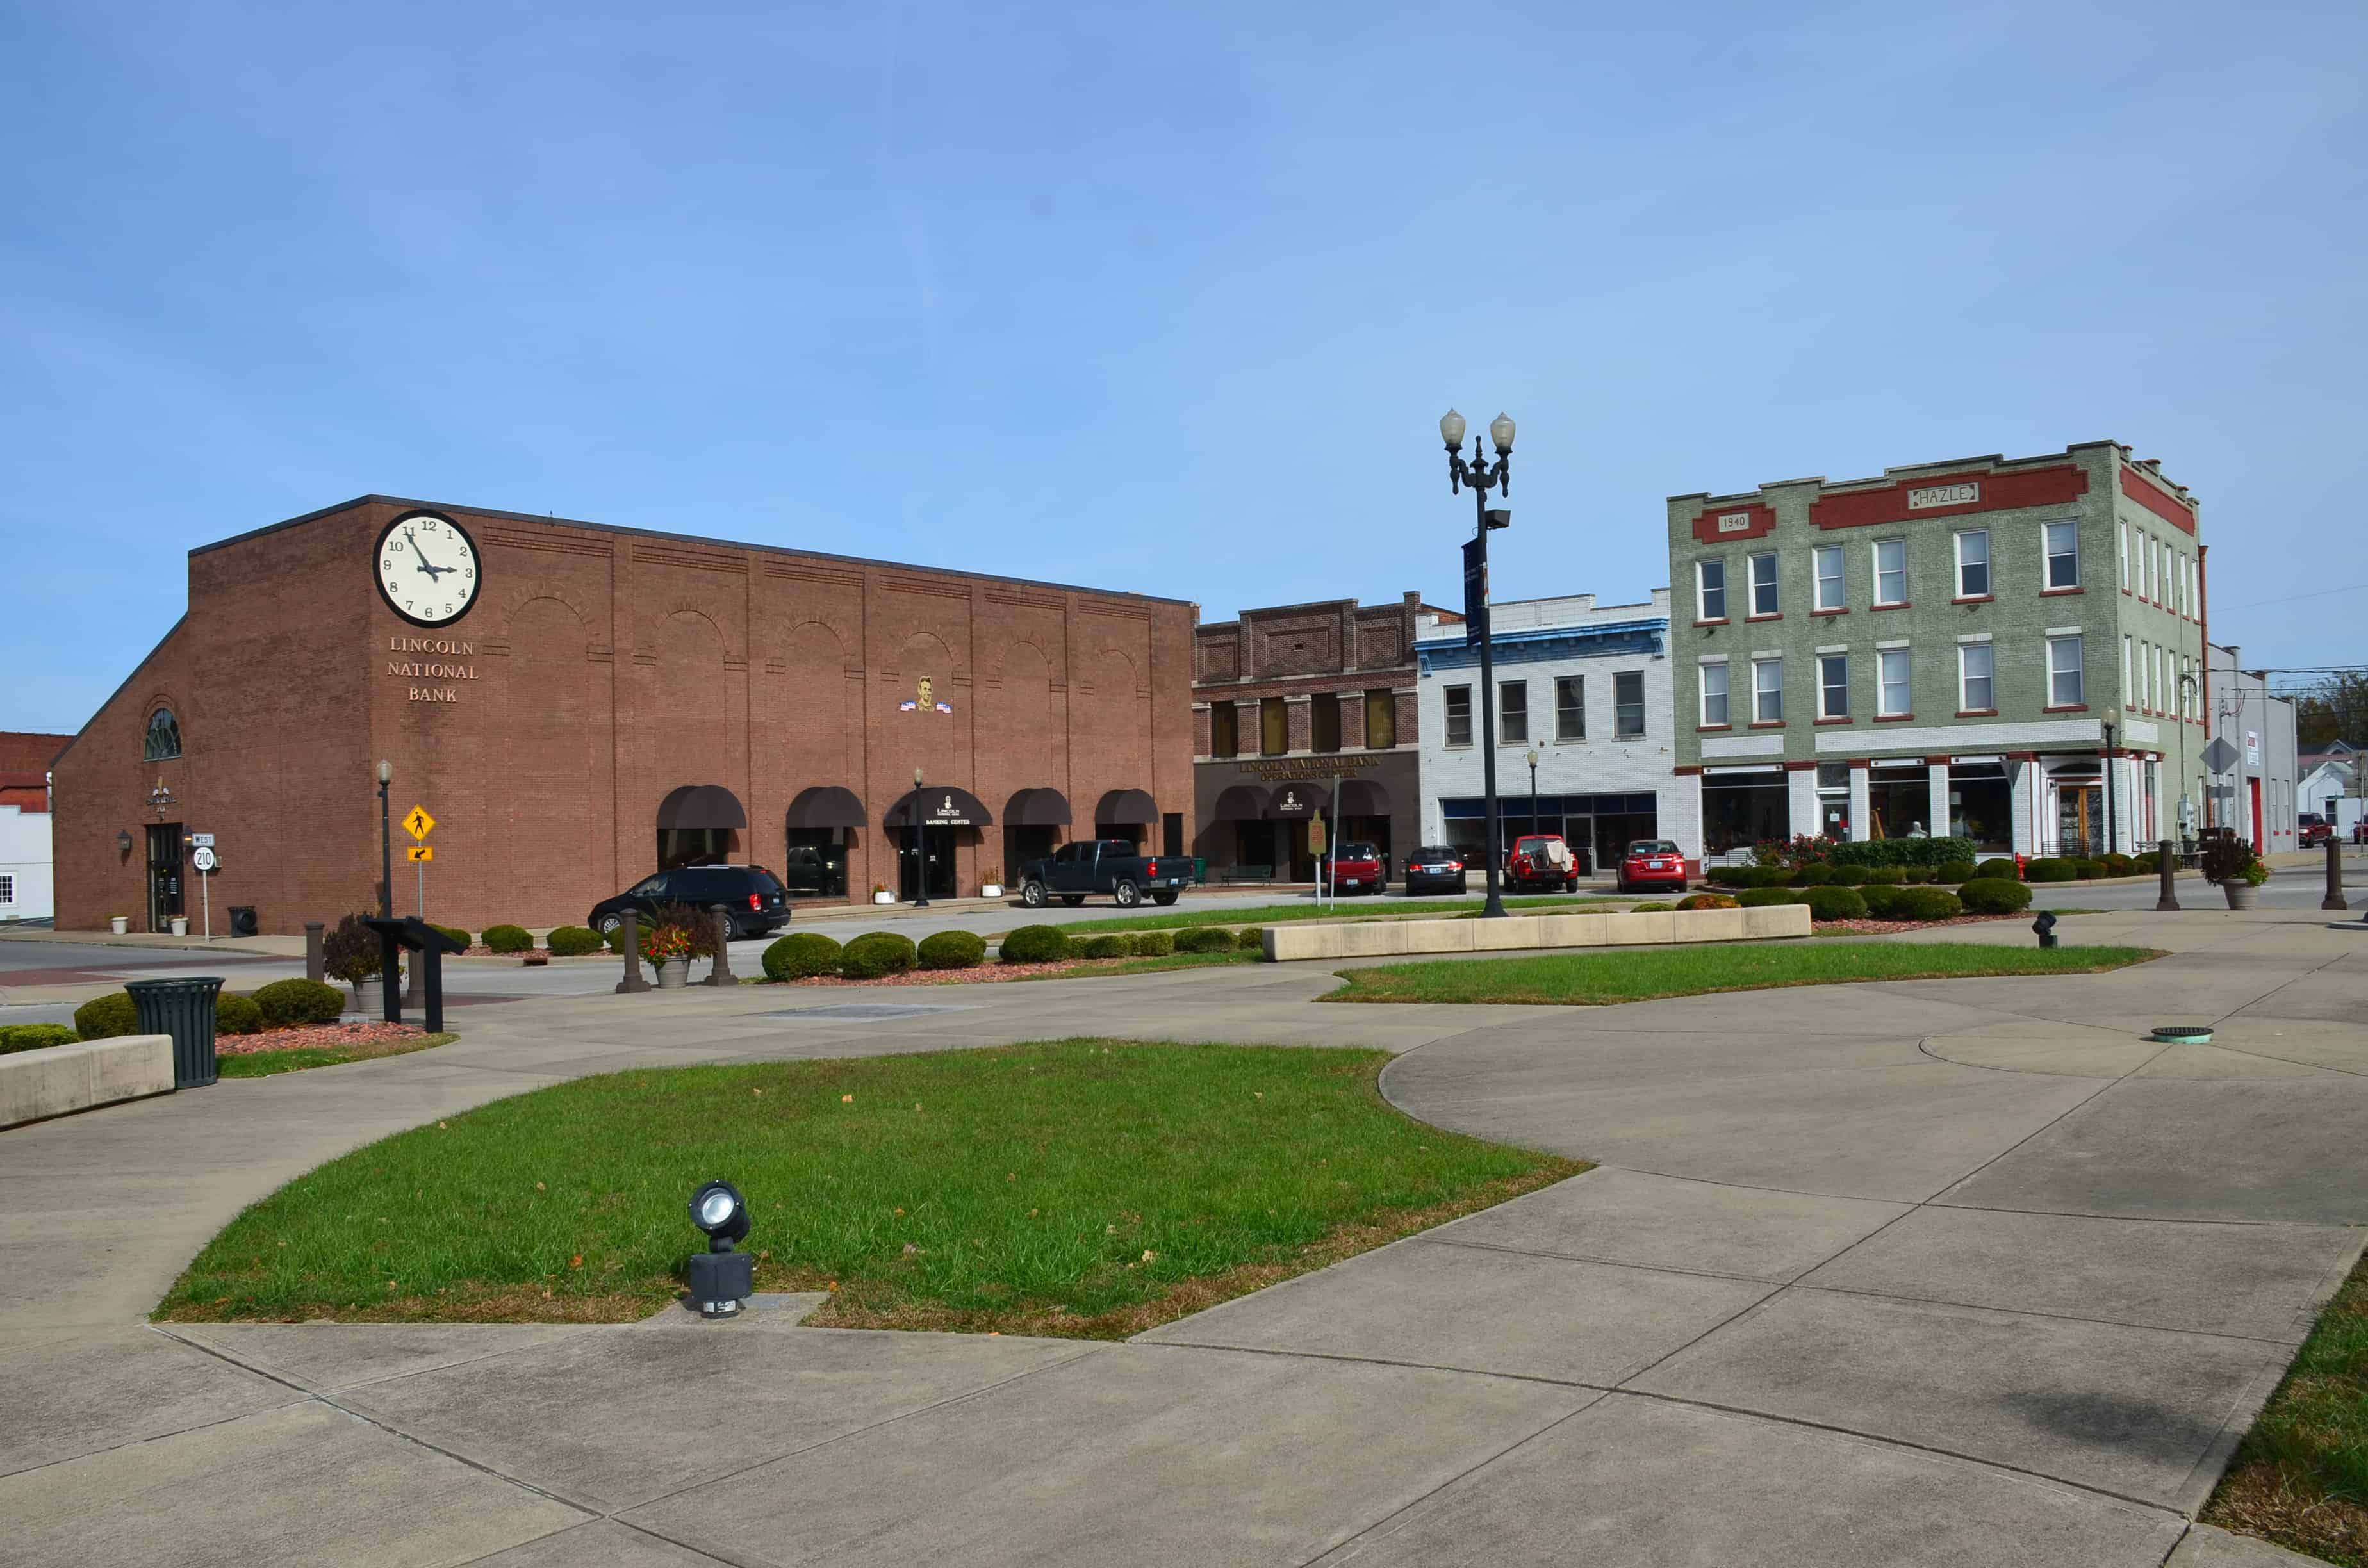 Lincoln Square Circle in Hodgenville, Kentucky